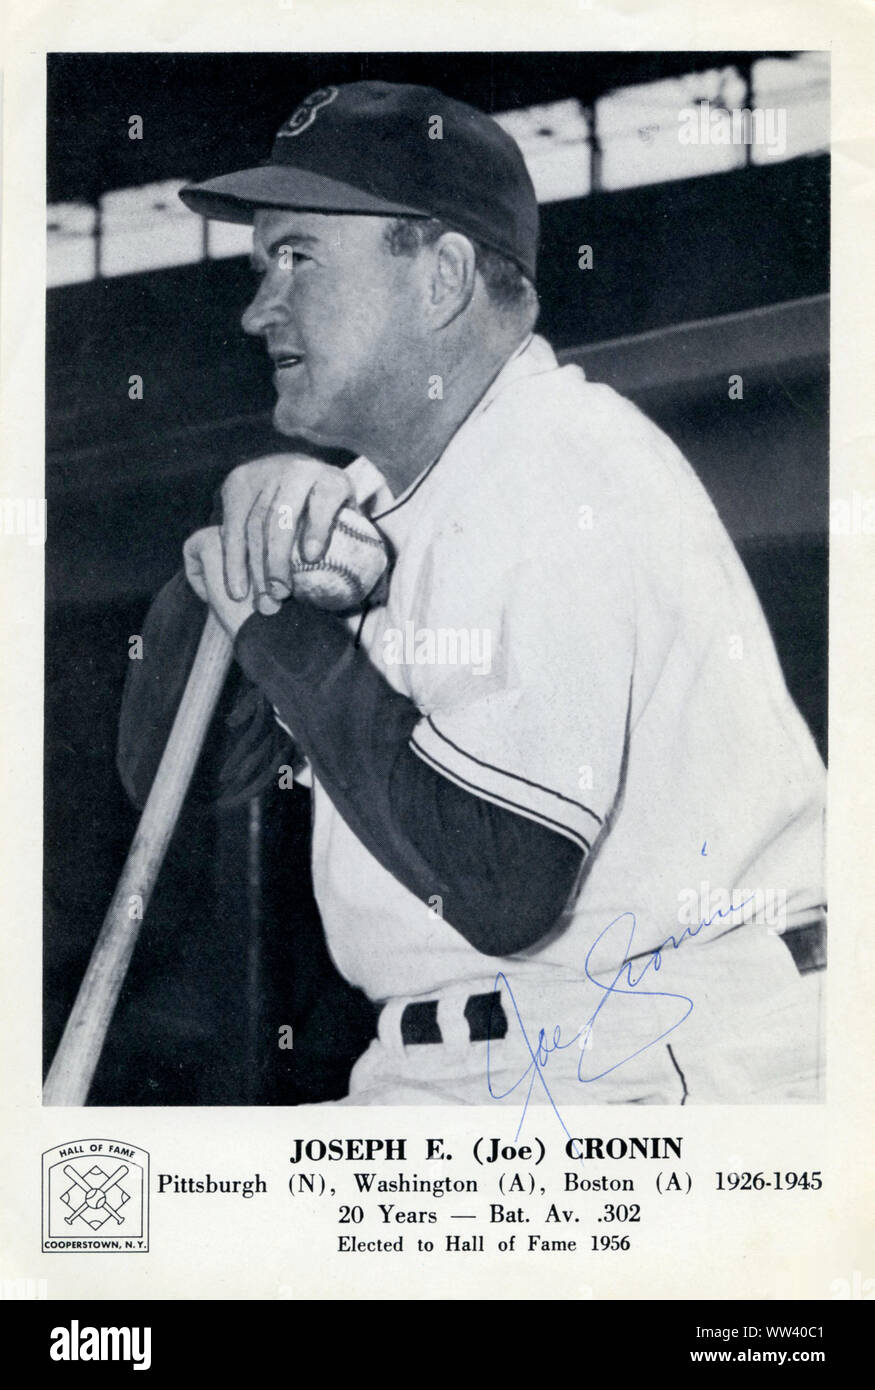 Joe Cronin is a Hall of Fame baseball player primarily with the Boston Red Sox who also was a manager and President of the American League Stock Photo